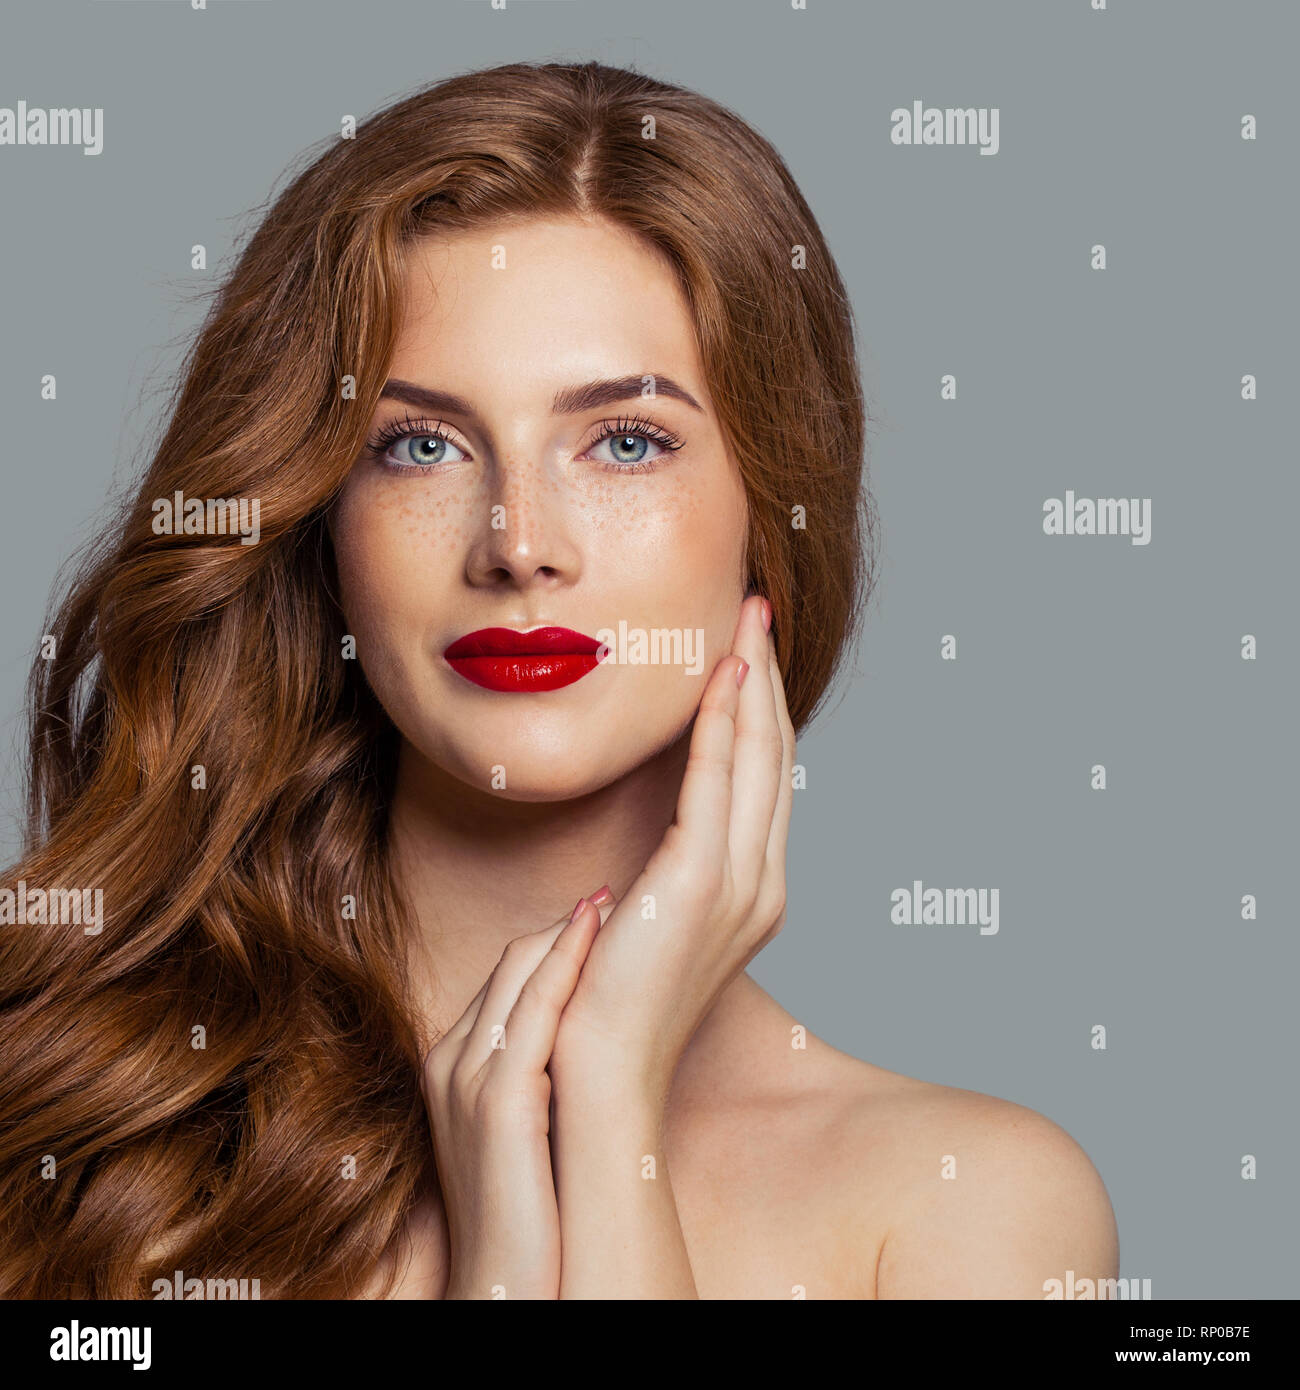 Jolie rousse girl with red lips makeup looking at camera, parfait face closeup Banque D'Images